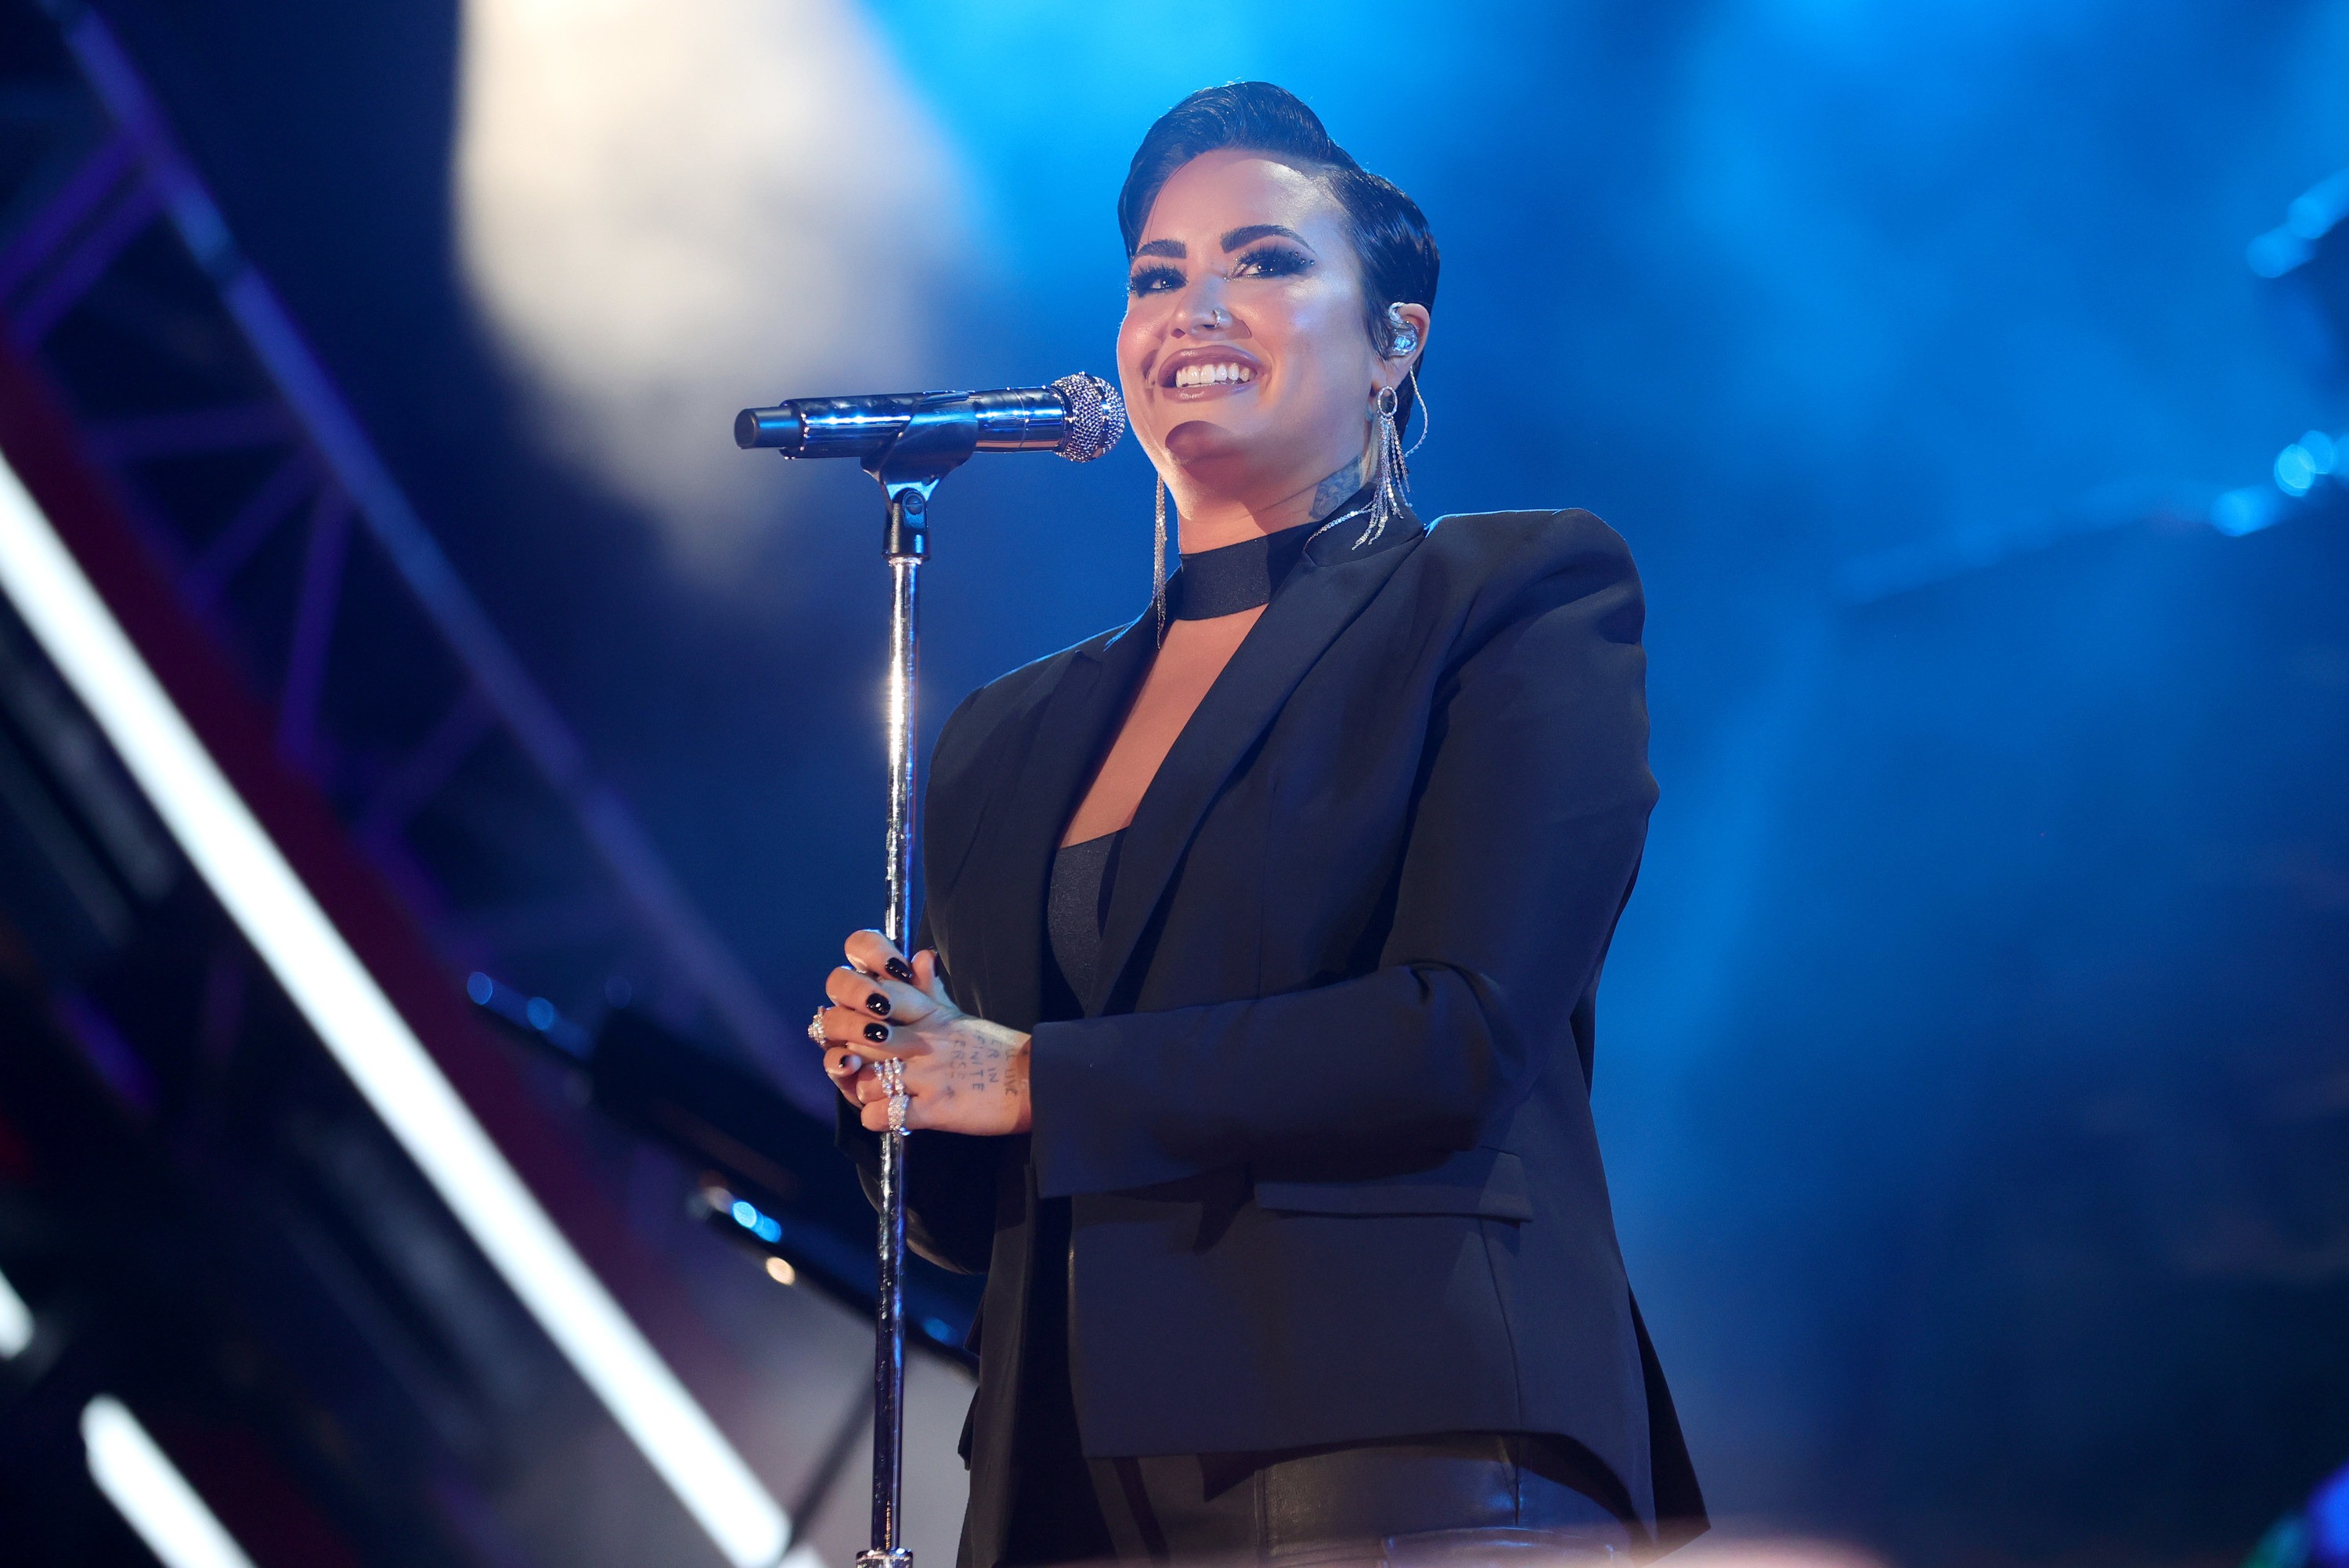 Demi smiles while gripping a microphone stand